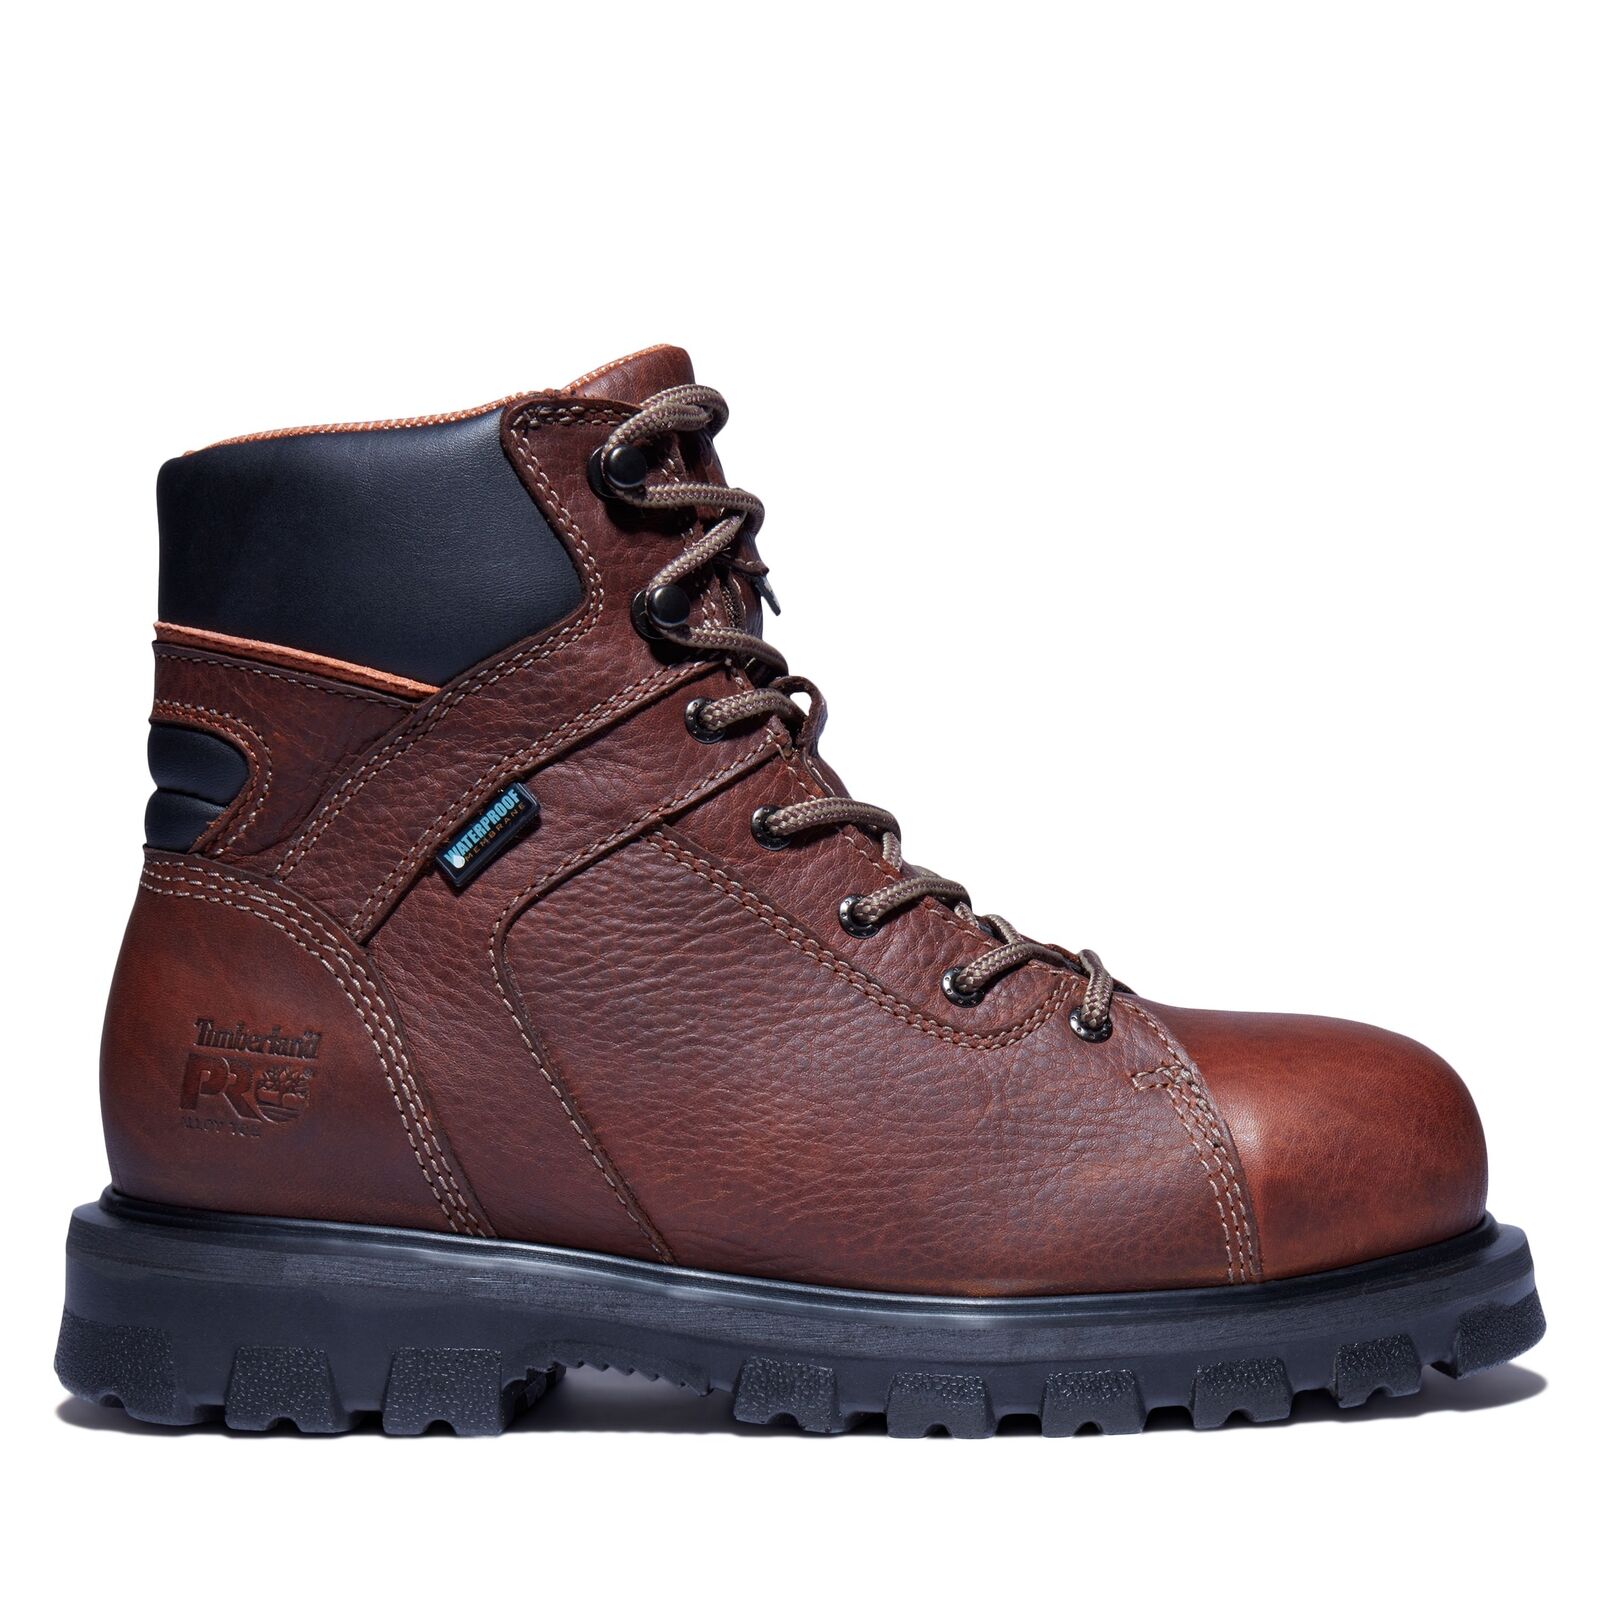 Women's Timberland Pro Rigmaster Alloy Toe Work Boot $47.59 + Free Shipping